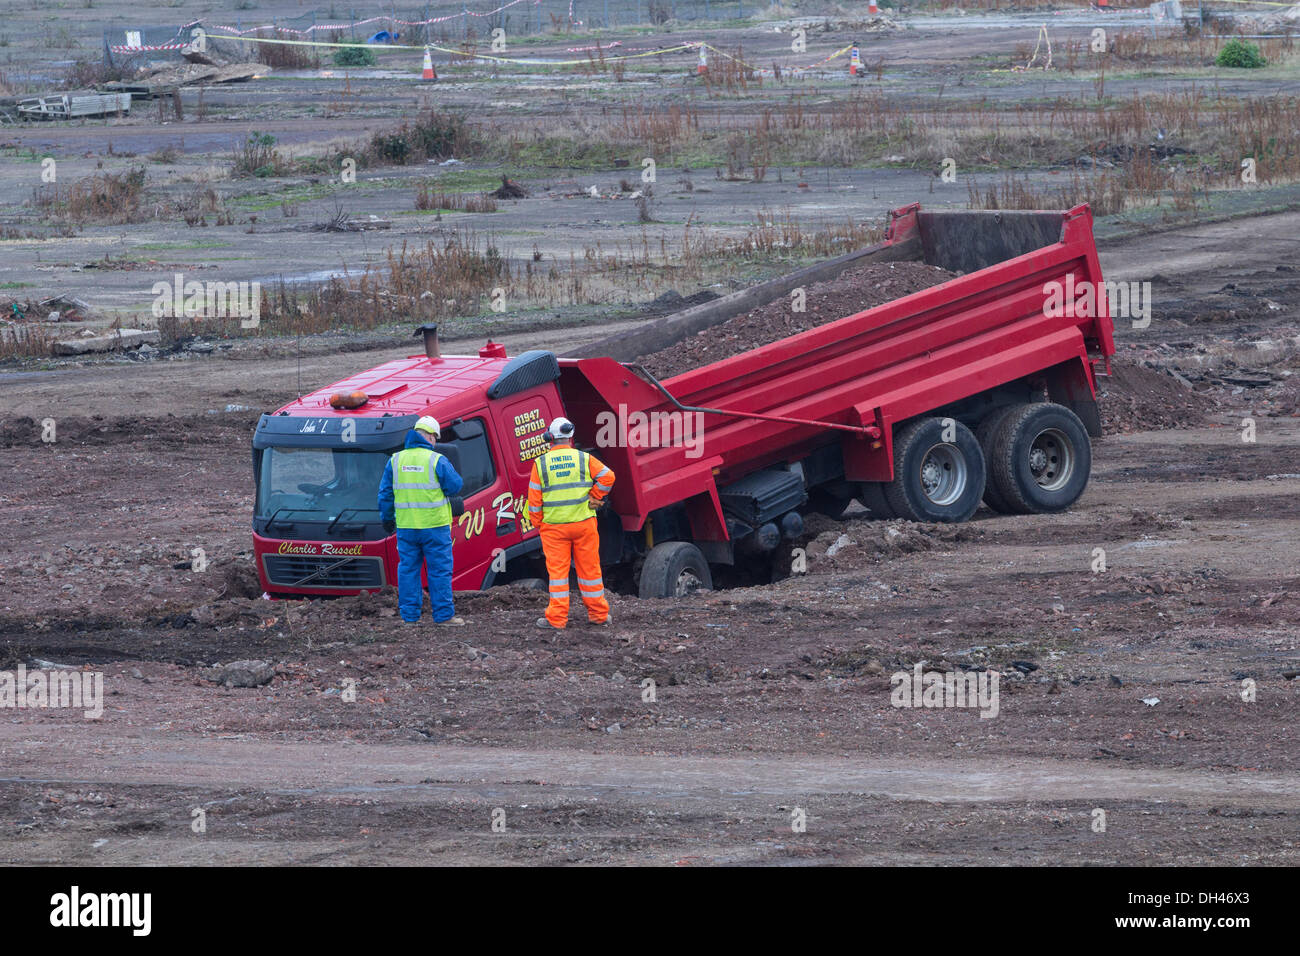 Lorry, truck stuck in sinkhole on demolition/ building site. UK Stock Photo